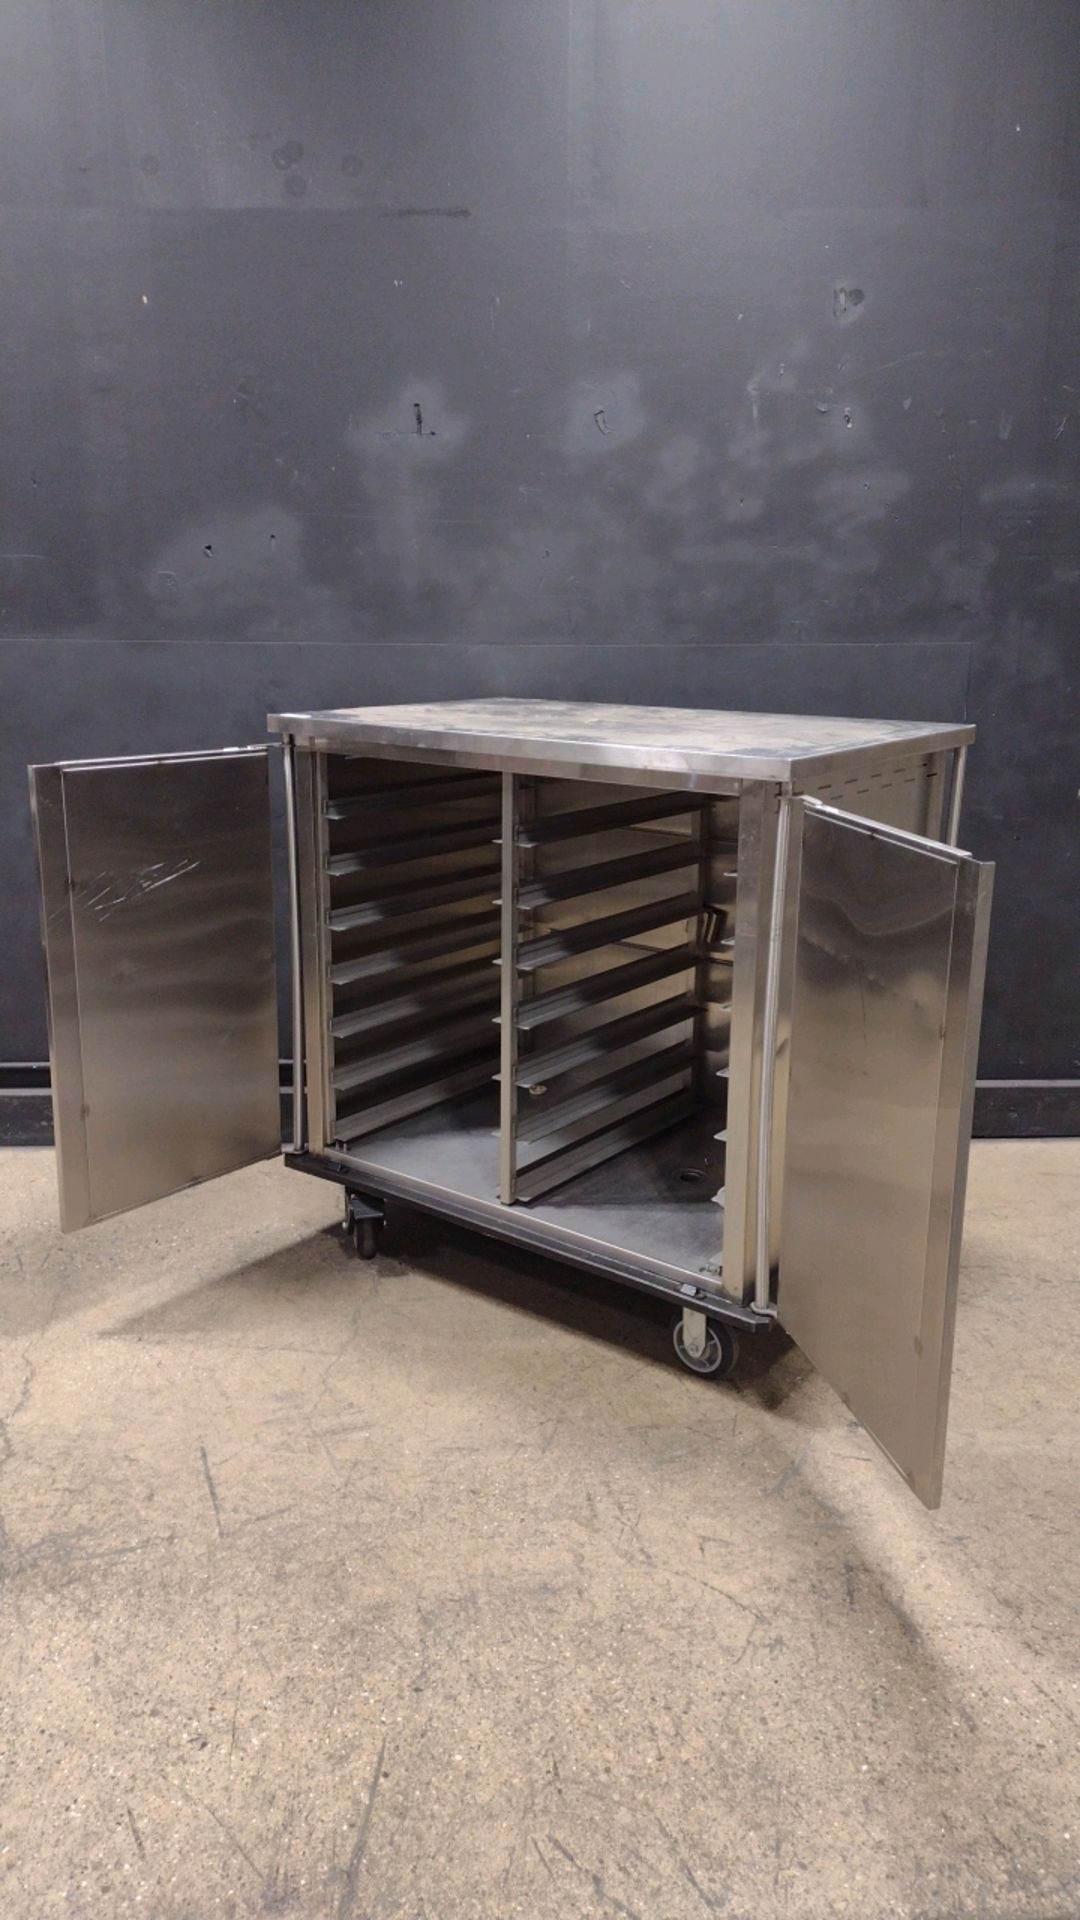 DINEX CARLISLE SS FOOD TRAY CART (LOCATED AT 3325 MOUNT PROSPECT ROAD, FRANKLIN PARK, IL, 60131)